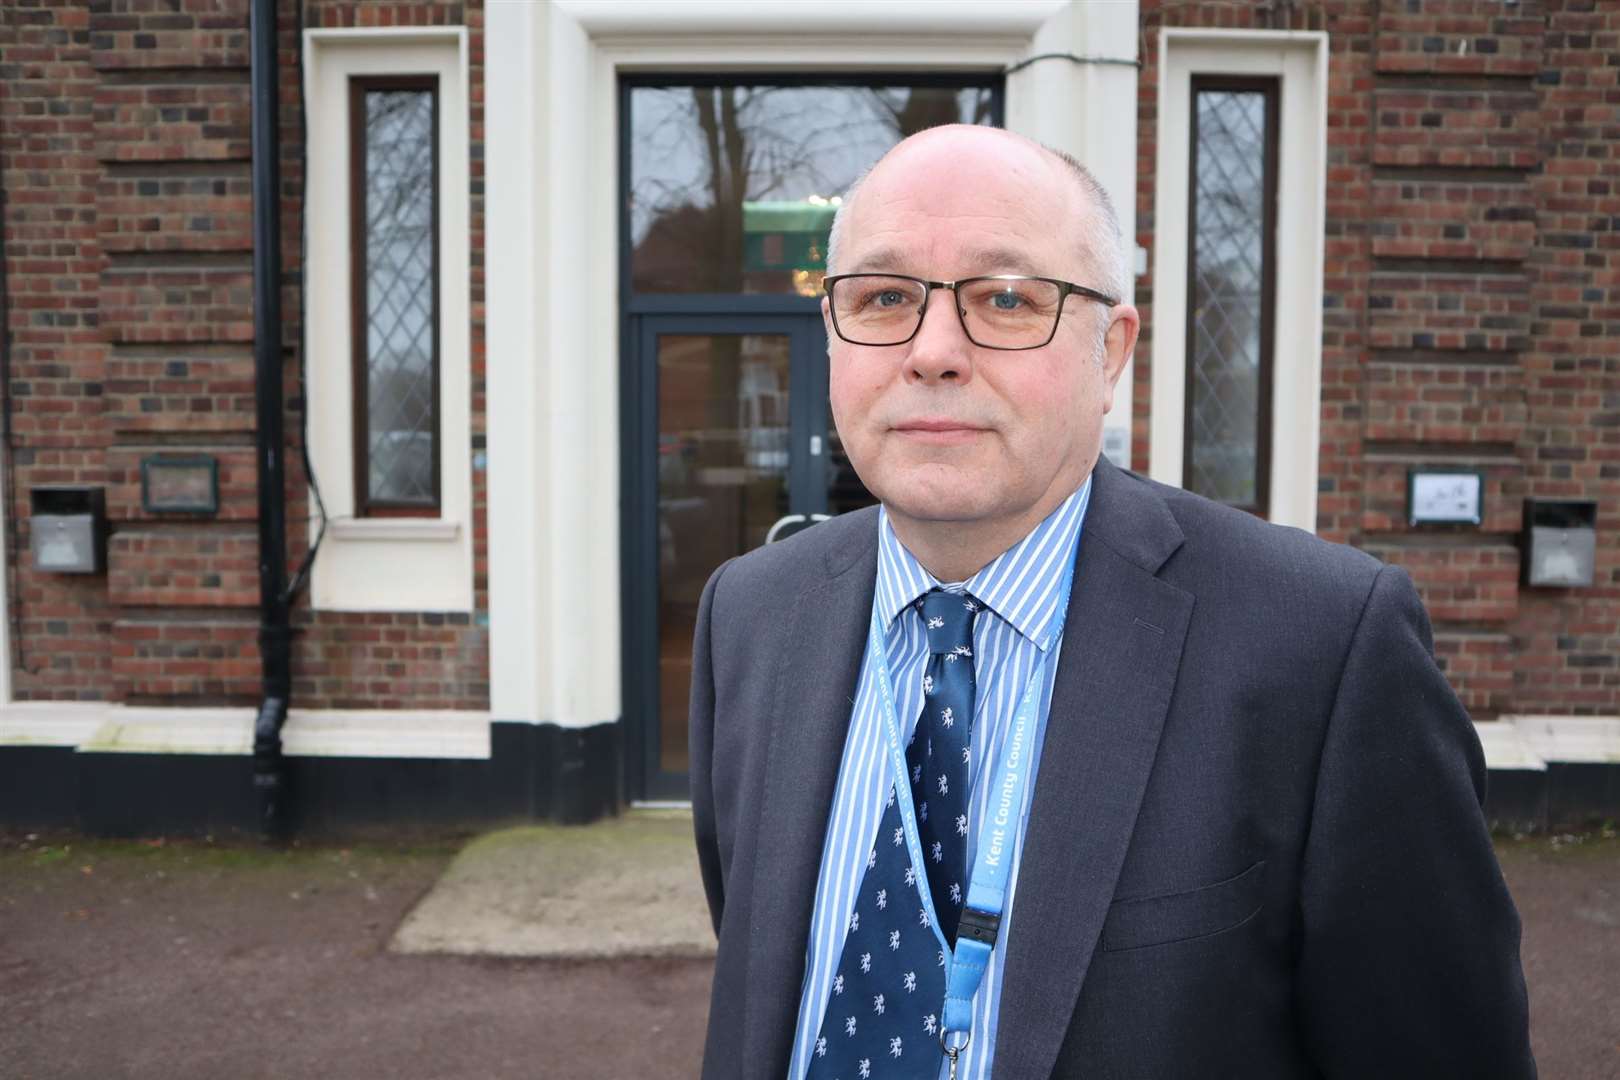 Sittingbourne South Cllr John Wright said any reuse of pubs sitting empty "should be encouraged"